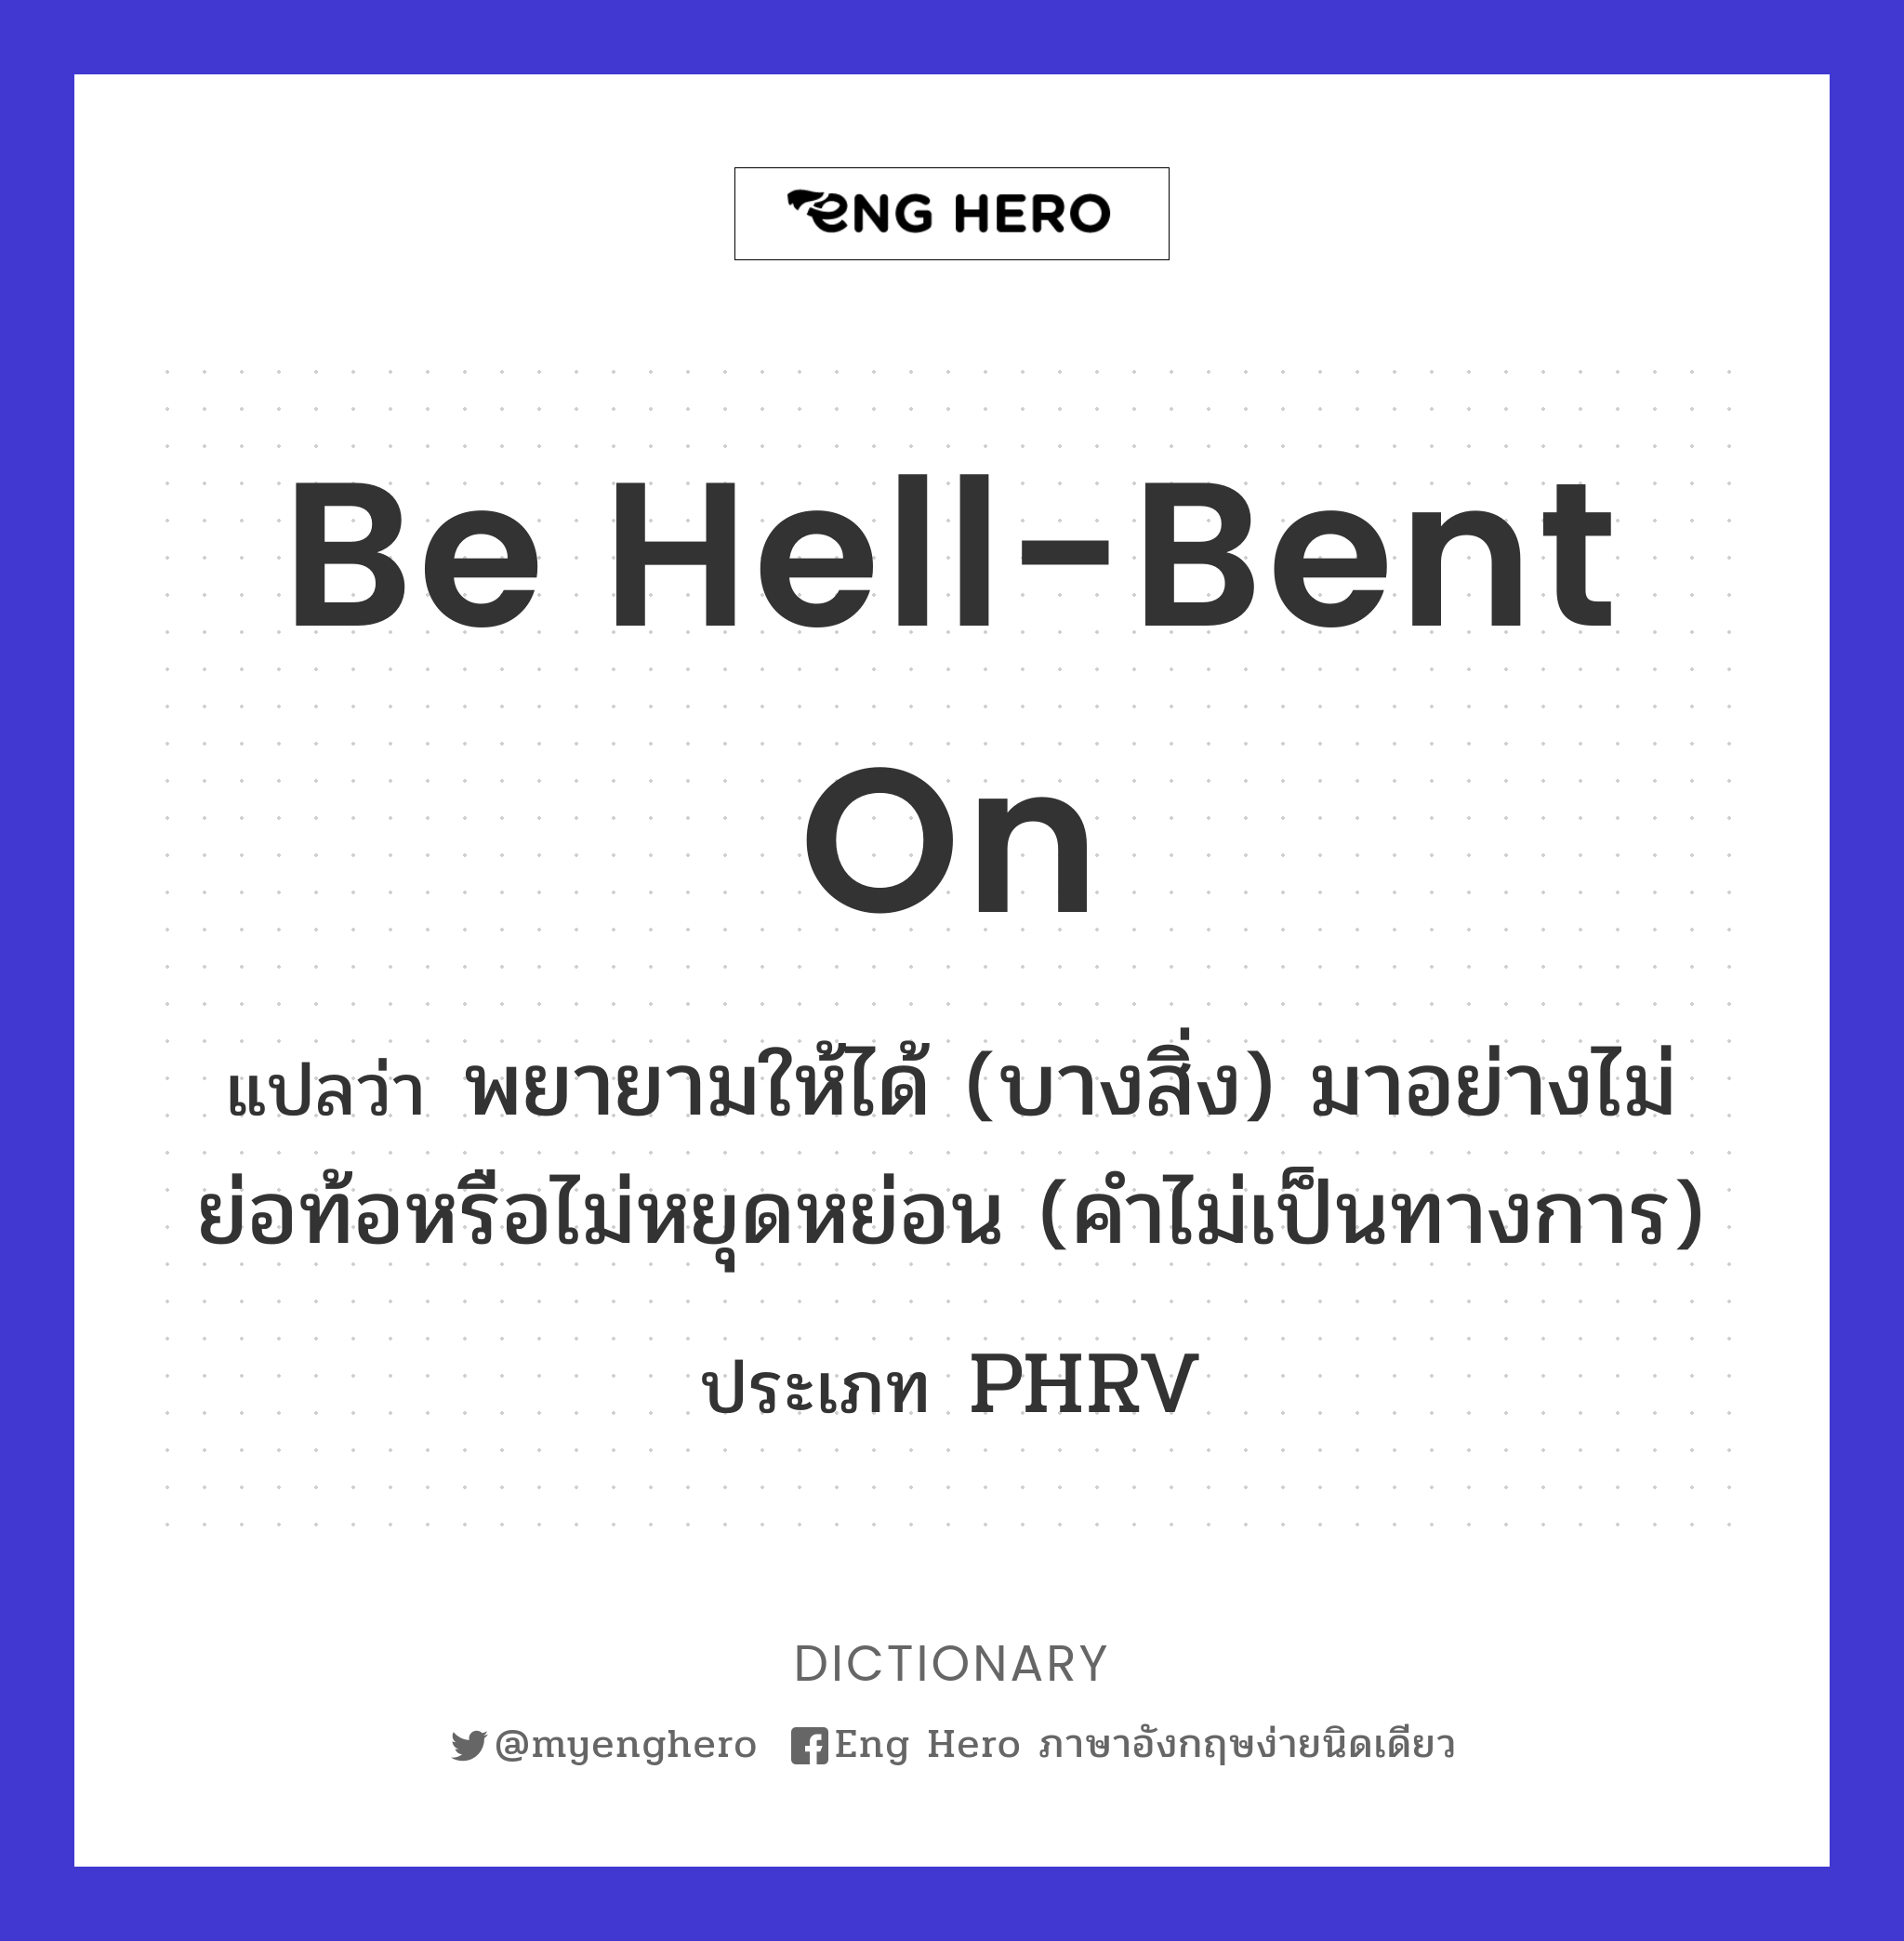 be hell-bent on